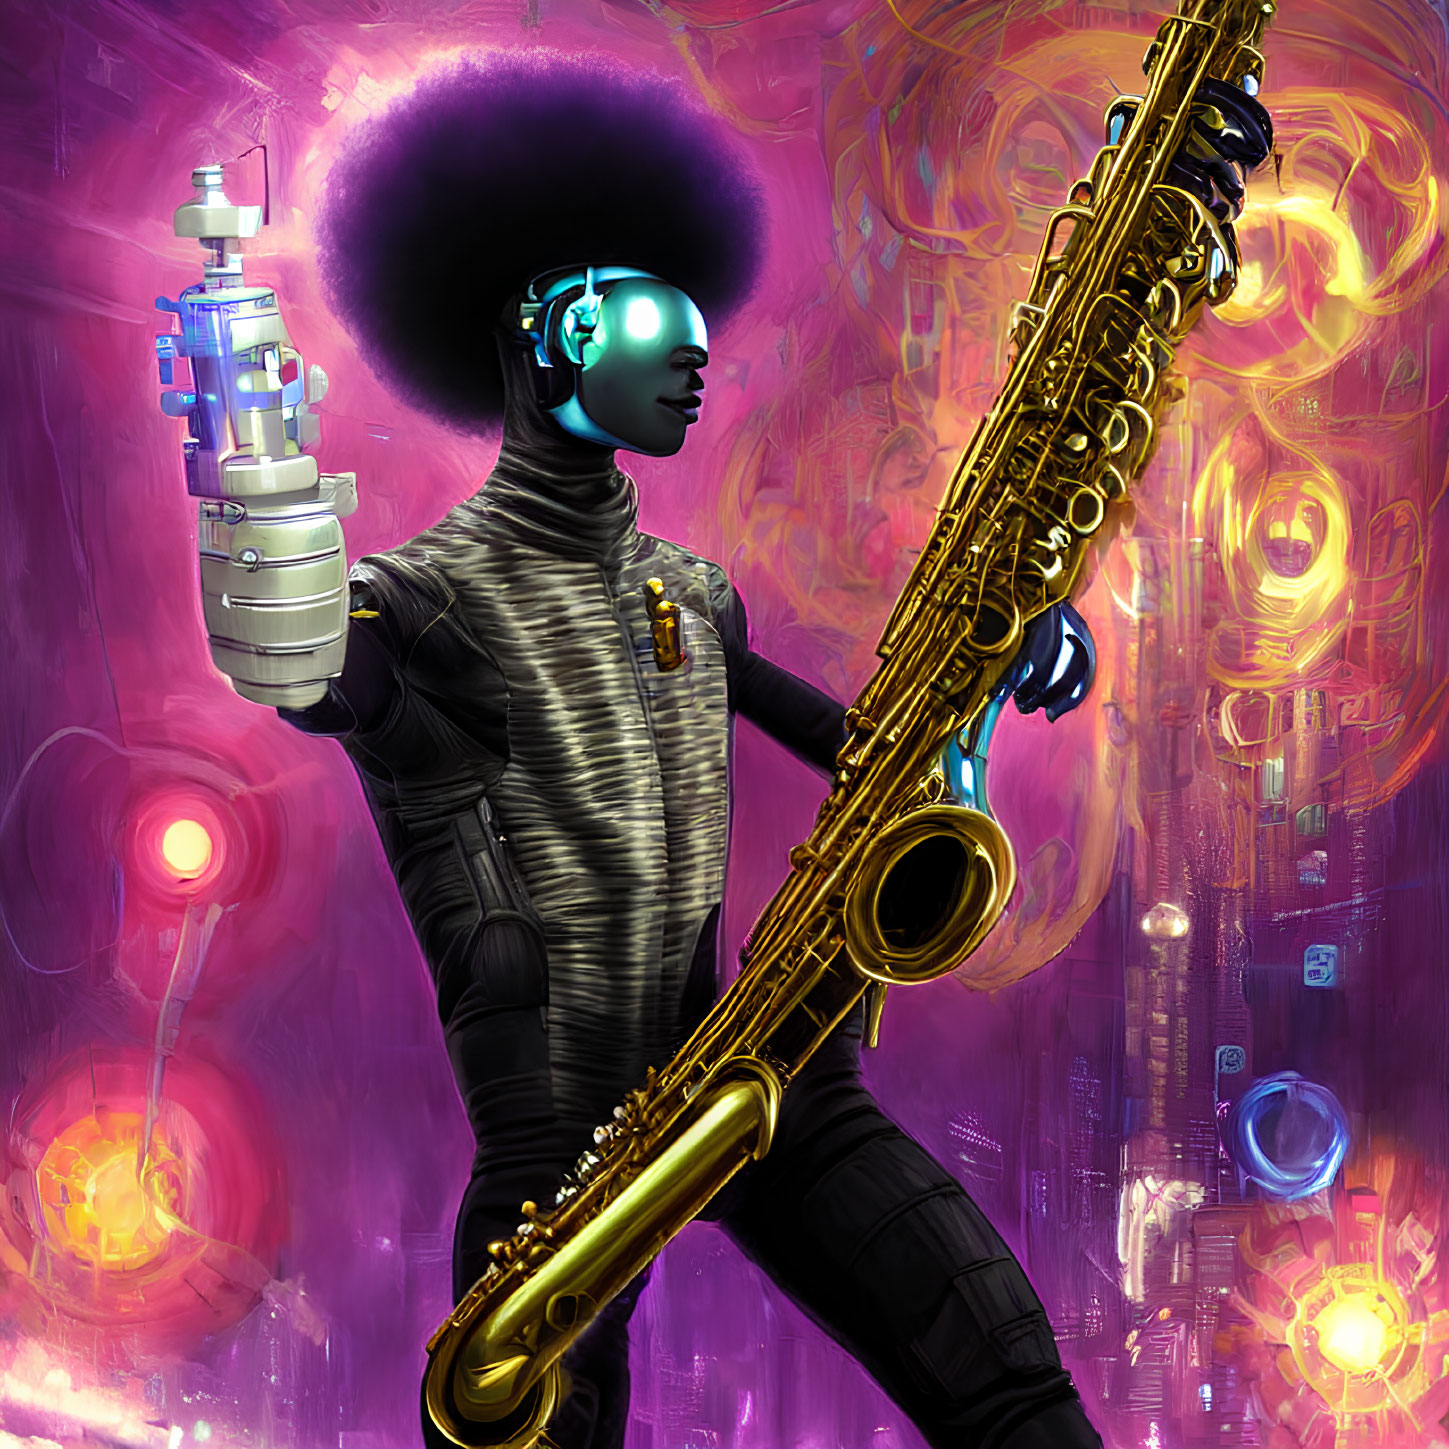 Futuristic robotic figure with afro and saxophone in neon cybernetic setting